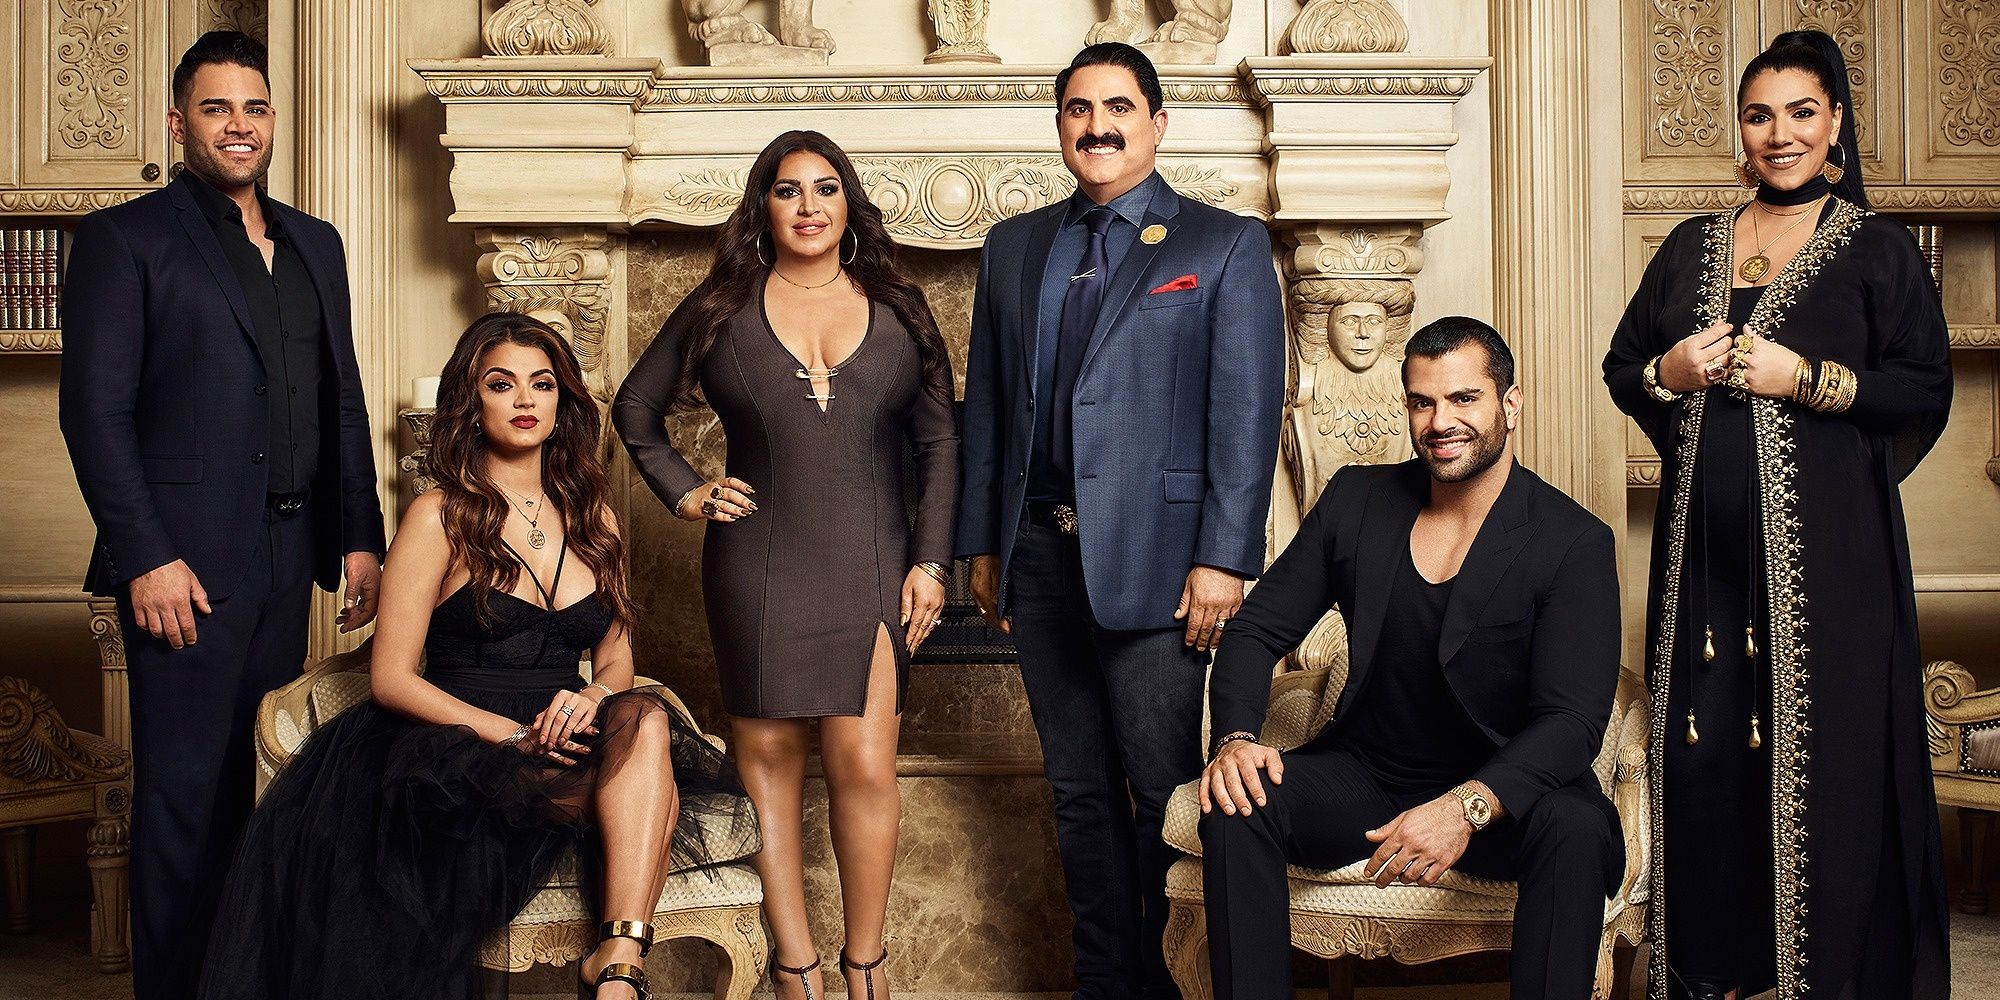 The cast of "Shahs of Sunset."